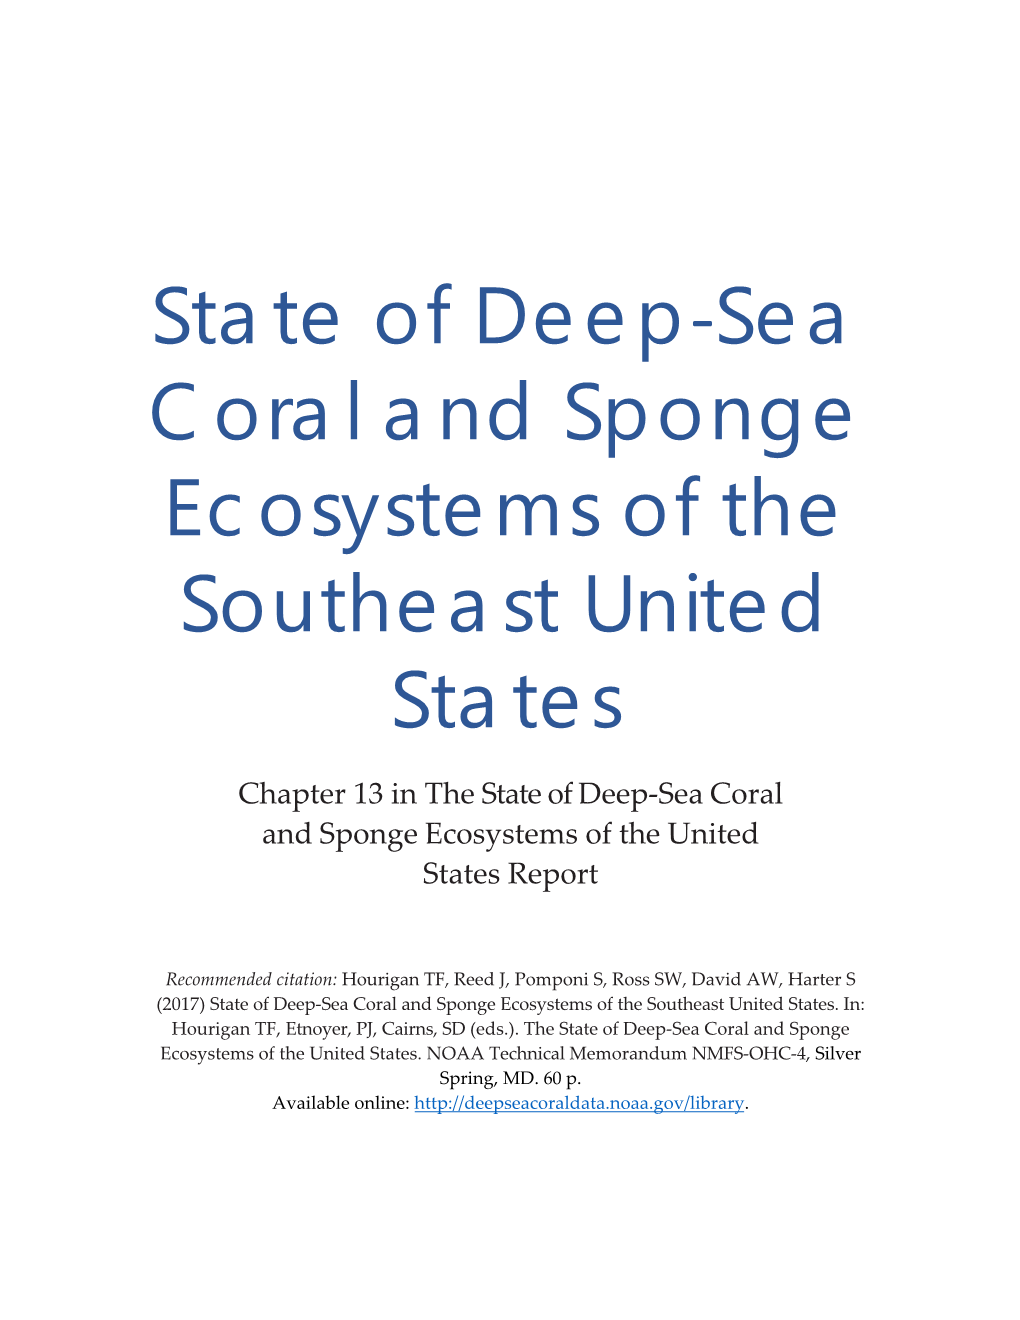 Chapter 13. State of Deep-Sea Coral and Sponge Ecosystems of the U.S